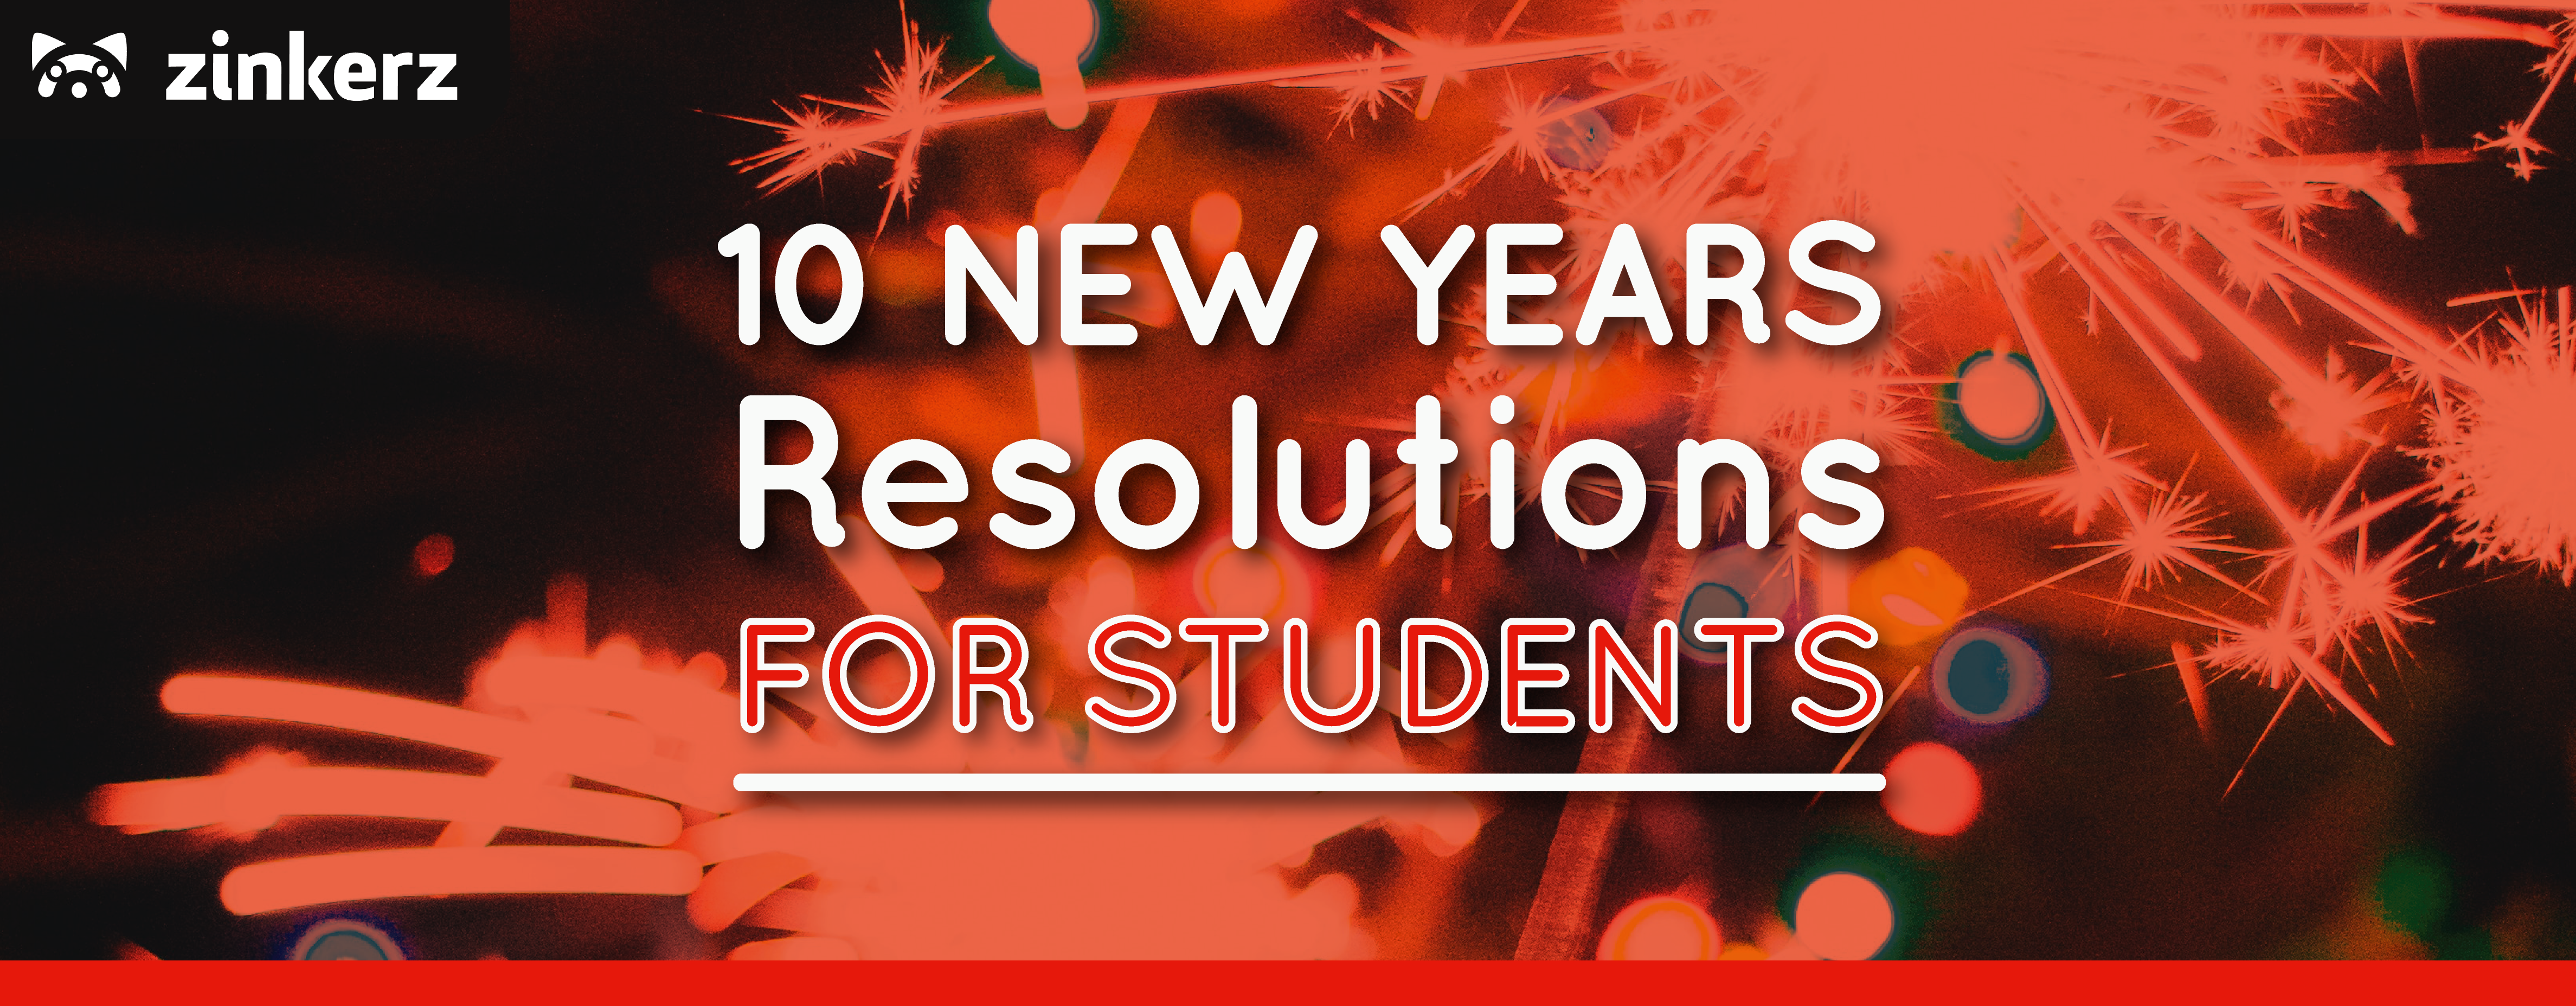 10 New Years Resolutions for students